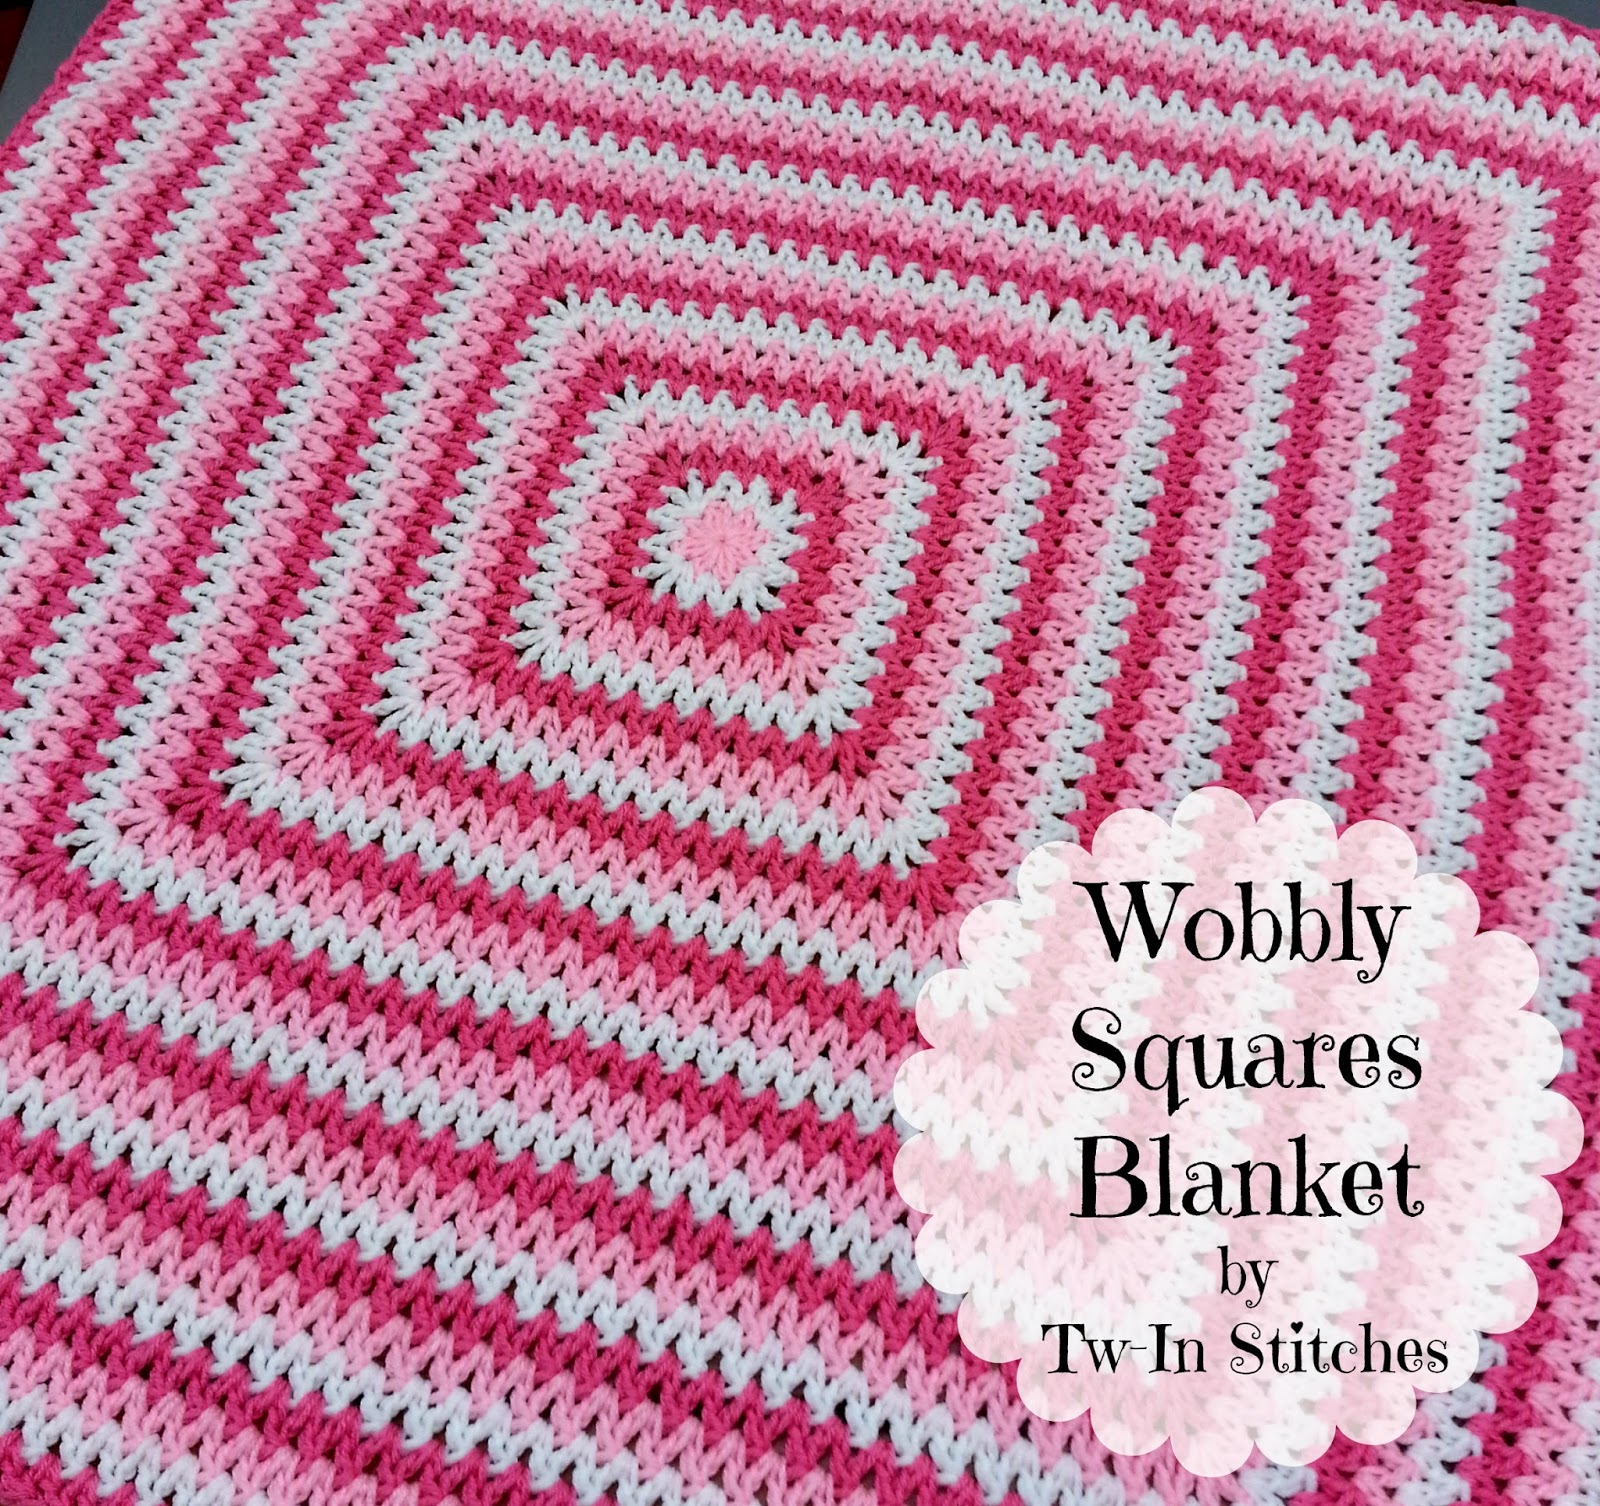 Knitted Squares Patterns Free Tw In Stitches Wobbly Squares Blanket Free Pattern Tw In Stitches